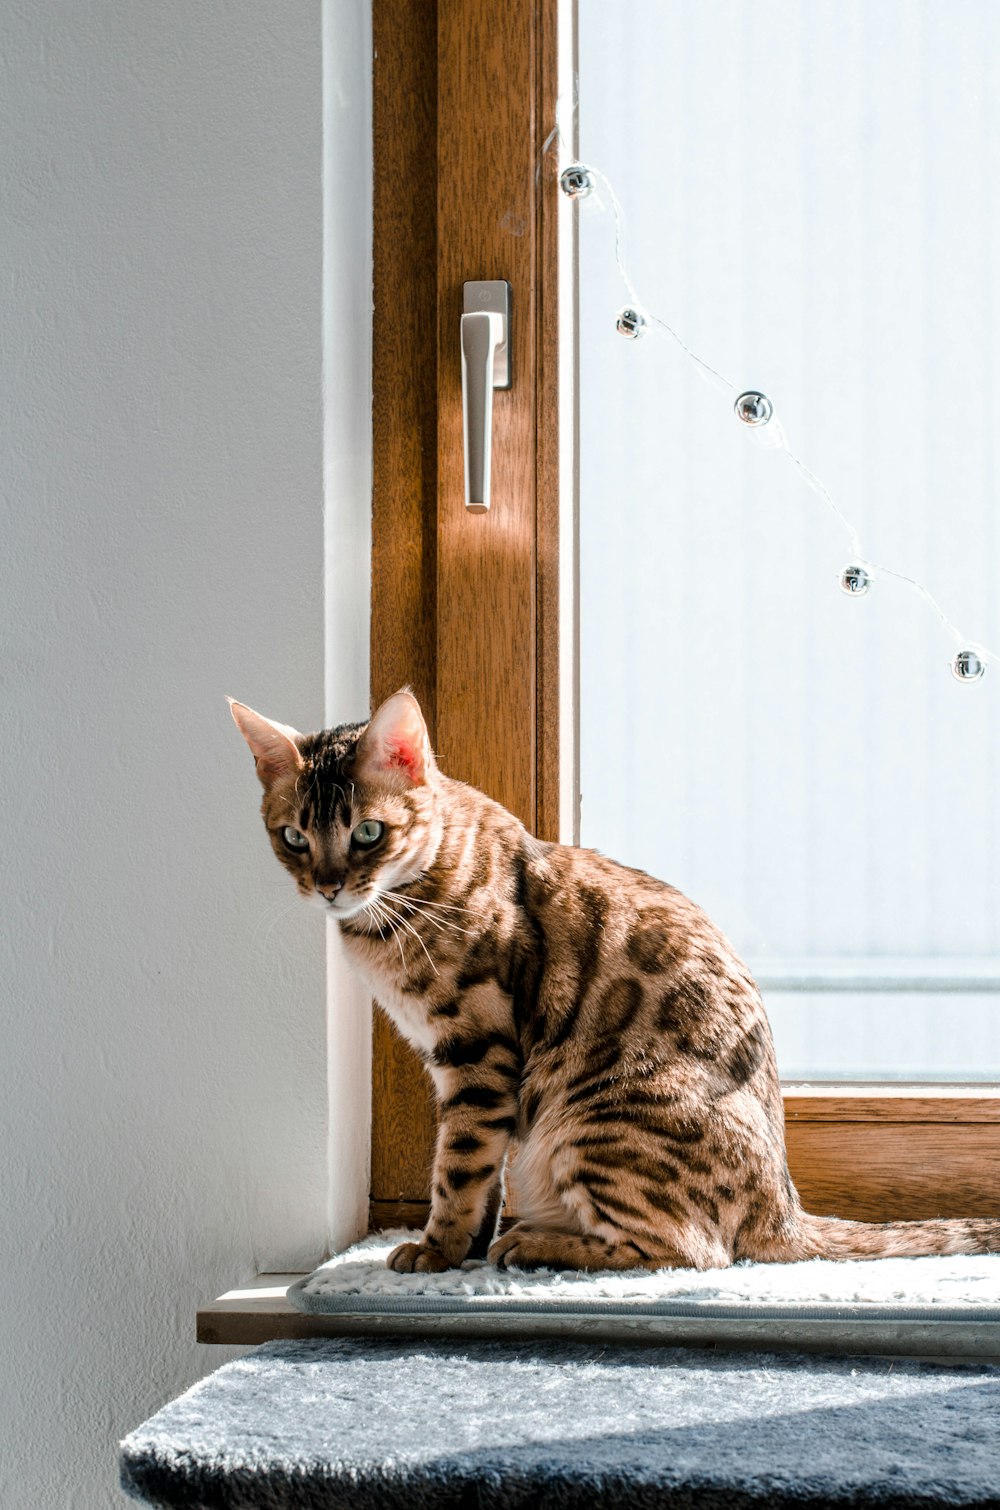 a cat sitting on a window sill looking out the window